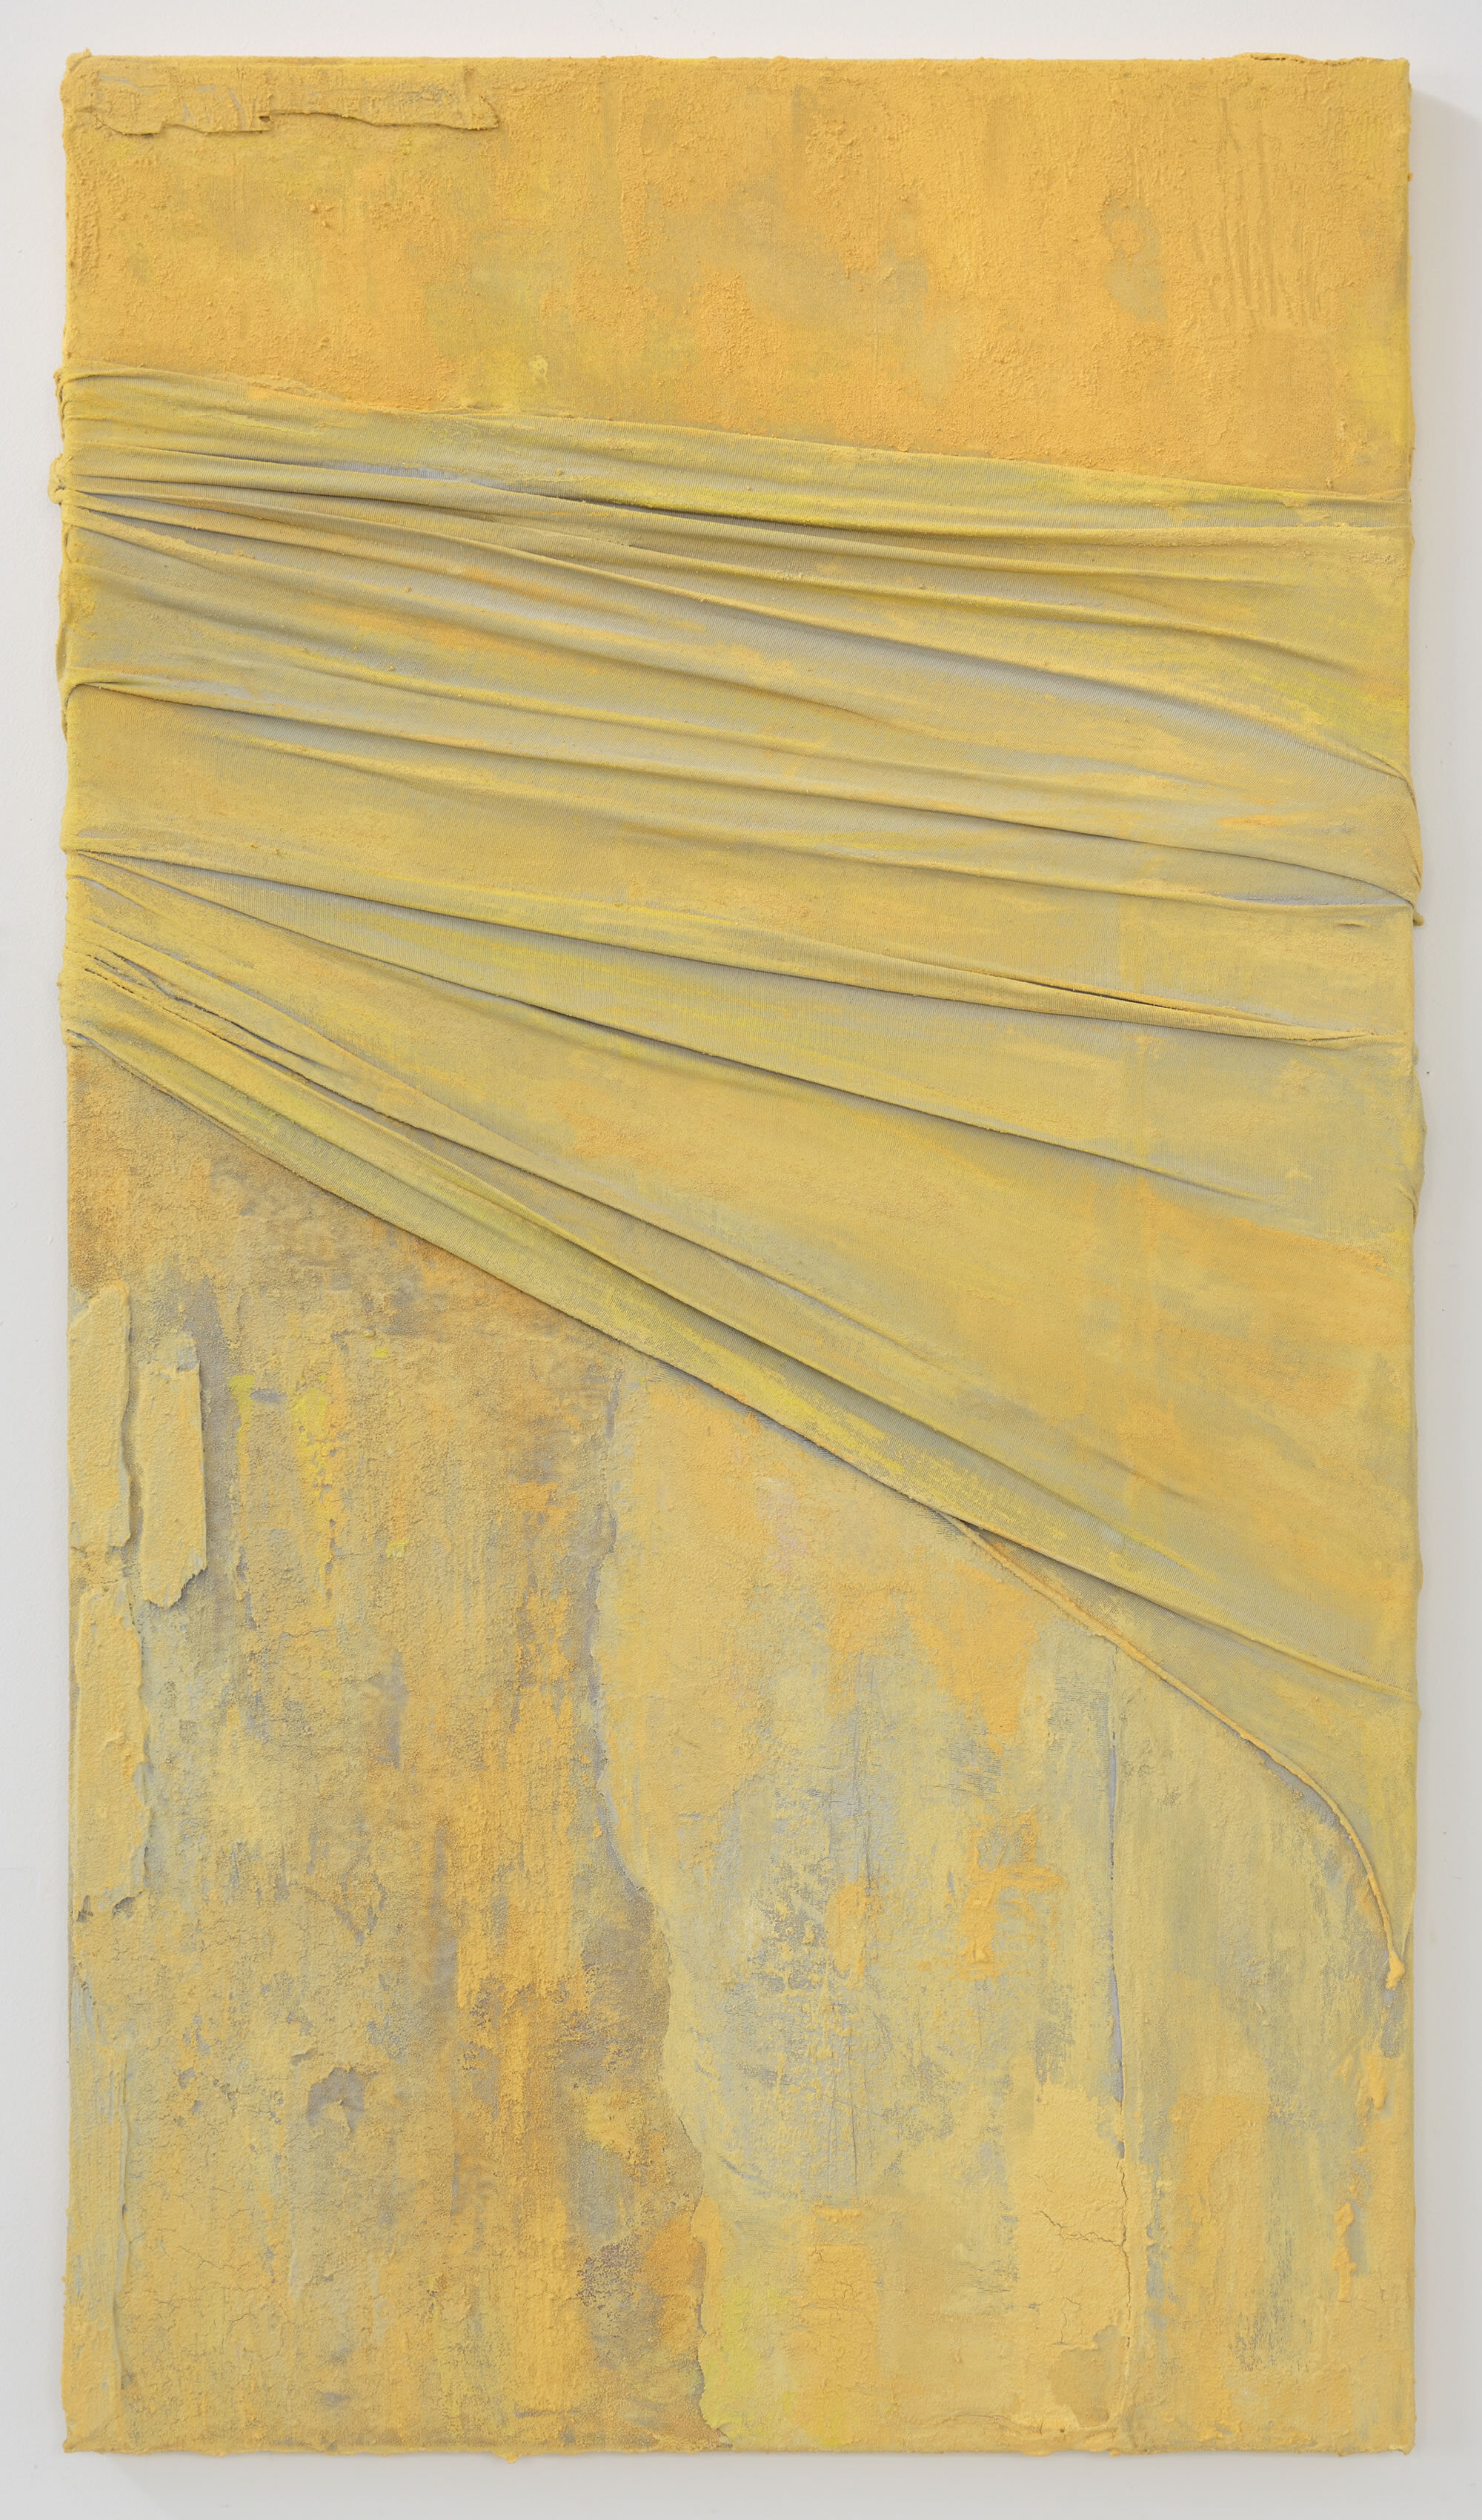 2. Anna Caione Yellow Pull _ Wrap II, 2018, Fabric _ Mixed media on canvas, 92cm x 51cm